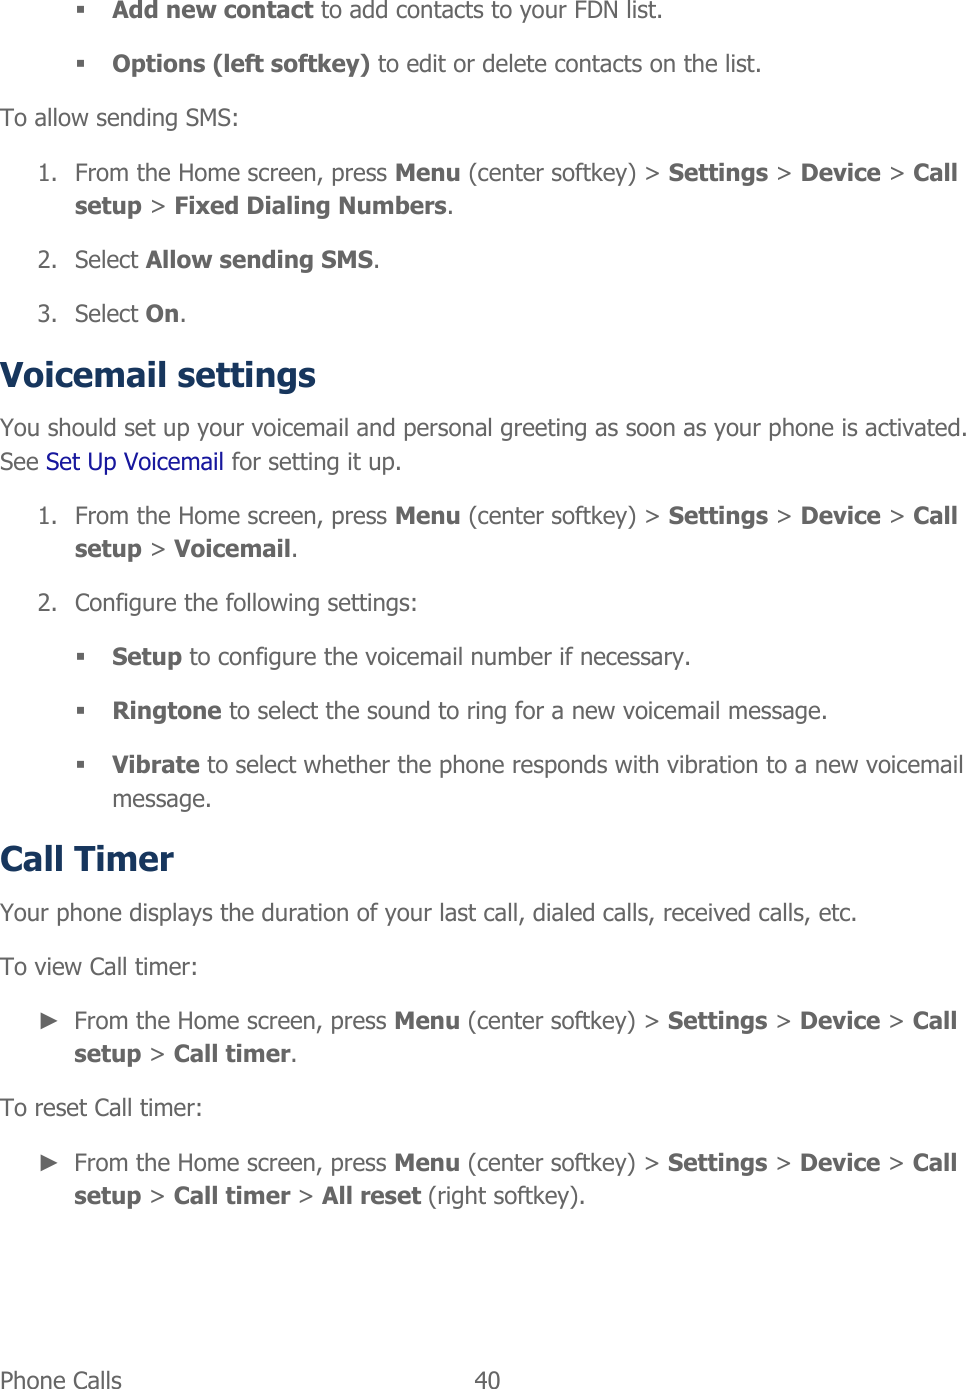  Phone Calls   40    Add new contact to add contacts to your FDN list.  Options (left softkey) to edit or delete contacts on the list. To allow sending SMS: 1. From the Home screen, press Menu (center softkey) &gt; Settings &gt; Device &gt; Call setup &gt; Fixed Dialing Numbers. 2. Select Allow sending SMS. 3. Select On. Voicemail settings You should set up your voicemail and personal greeting as soon as your phone is activated. See Set Up Voicemail for setting it up. 1. From the Home screen, press Menu (center softkey) &gt; Settings &gt; Device &gt; Call setup &gt; Voicemail. 2. Configure the following settings:  Setup to configure the voicemail number if necessary.  Ringtone to select the sound to ring for a new voicemail message.  Vibrate to select whether the phone responds with vibration to a new voicemail message. Call Timer Your phone displays the duration of your last call, dialed calls, received calls, etc. To view Call timer: ► From the Home screen, press Menu (center softkey) &gt; Settings &gt; Device &gt; Call setup &gt; Call timer. To reset Call timer: ► From the Home screen, press Menu (center softkey) &gt; Settings &gt; Device &gt; Call setup &gt; Call timer &gt; All reset (right softkey). 